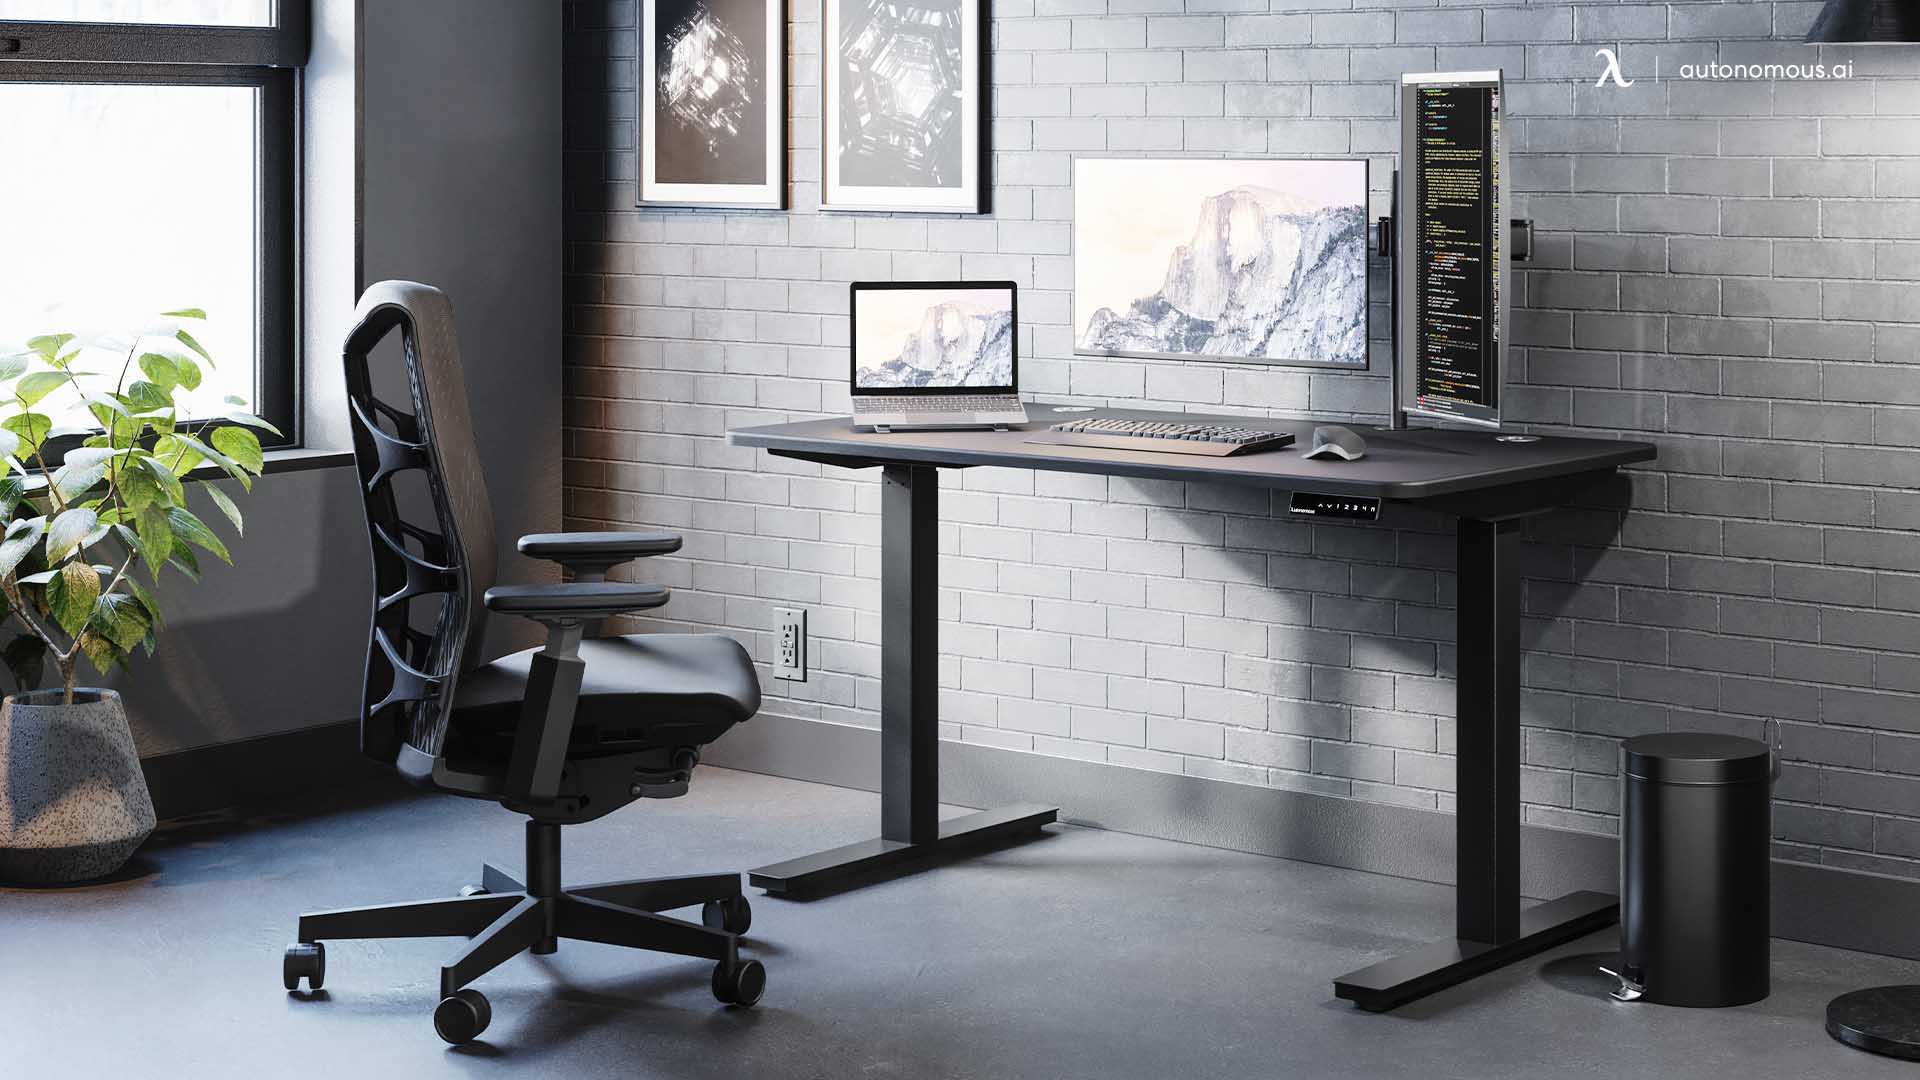 Why Choose Black for Your Narrow Black Desk